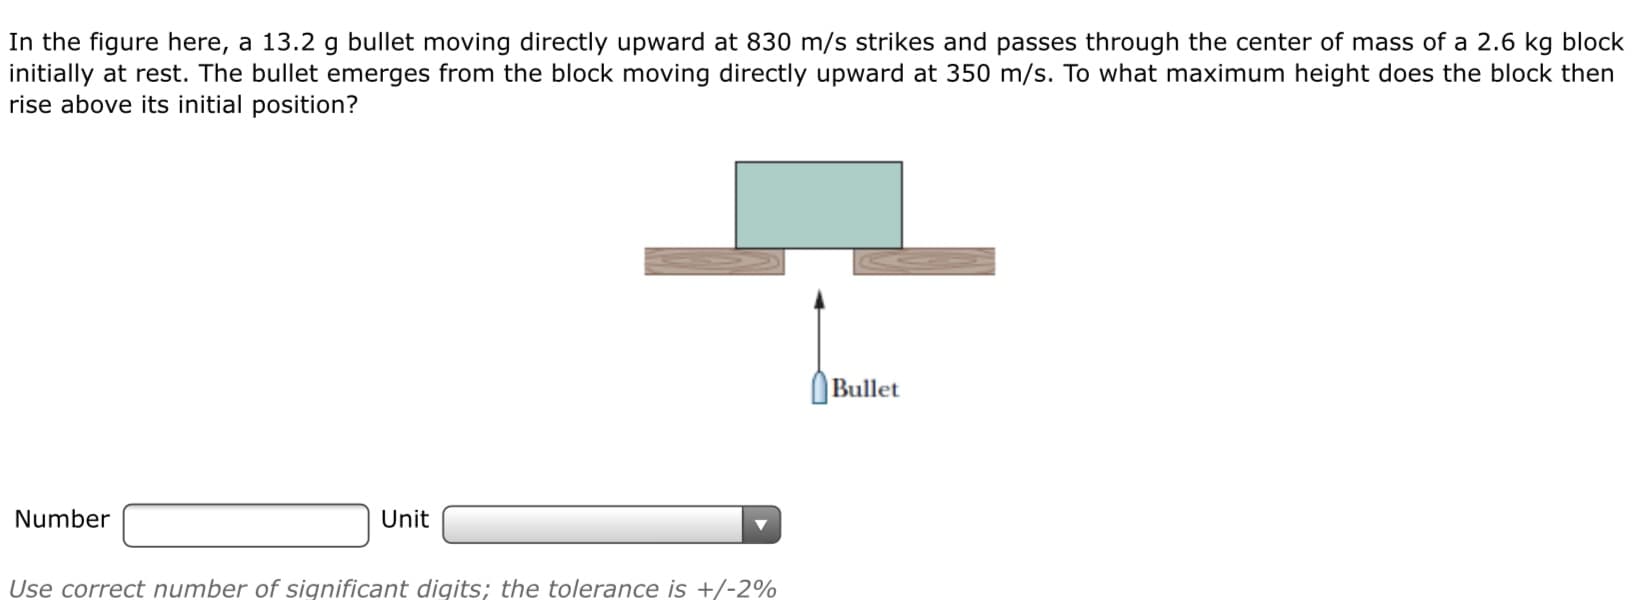 In the figure here, a 13.2 g bullet moving directly upward at 830 m/s strikes and passes through the center af mass of a 2.6 kg black
initially at rest. The bullet emerges from the block moving directly upward at 350 m/s. To what maximum height does the block then
rise above its initial position?
Bullet
